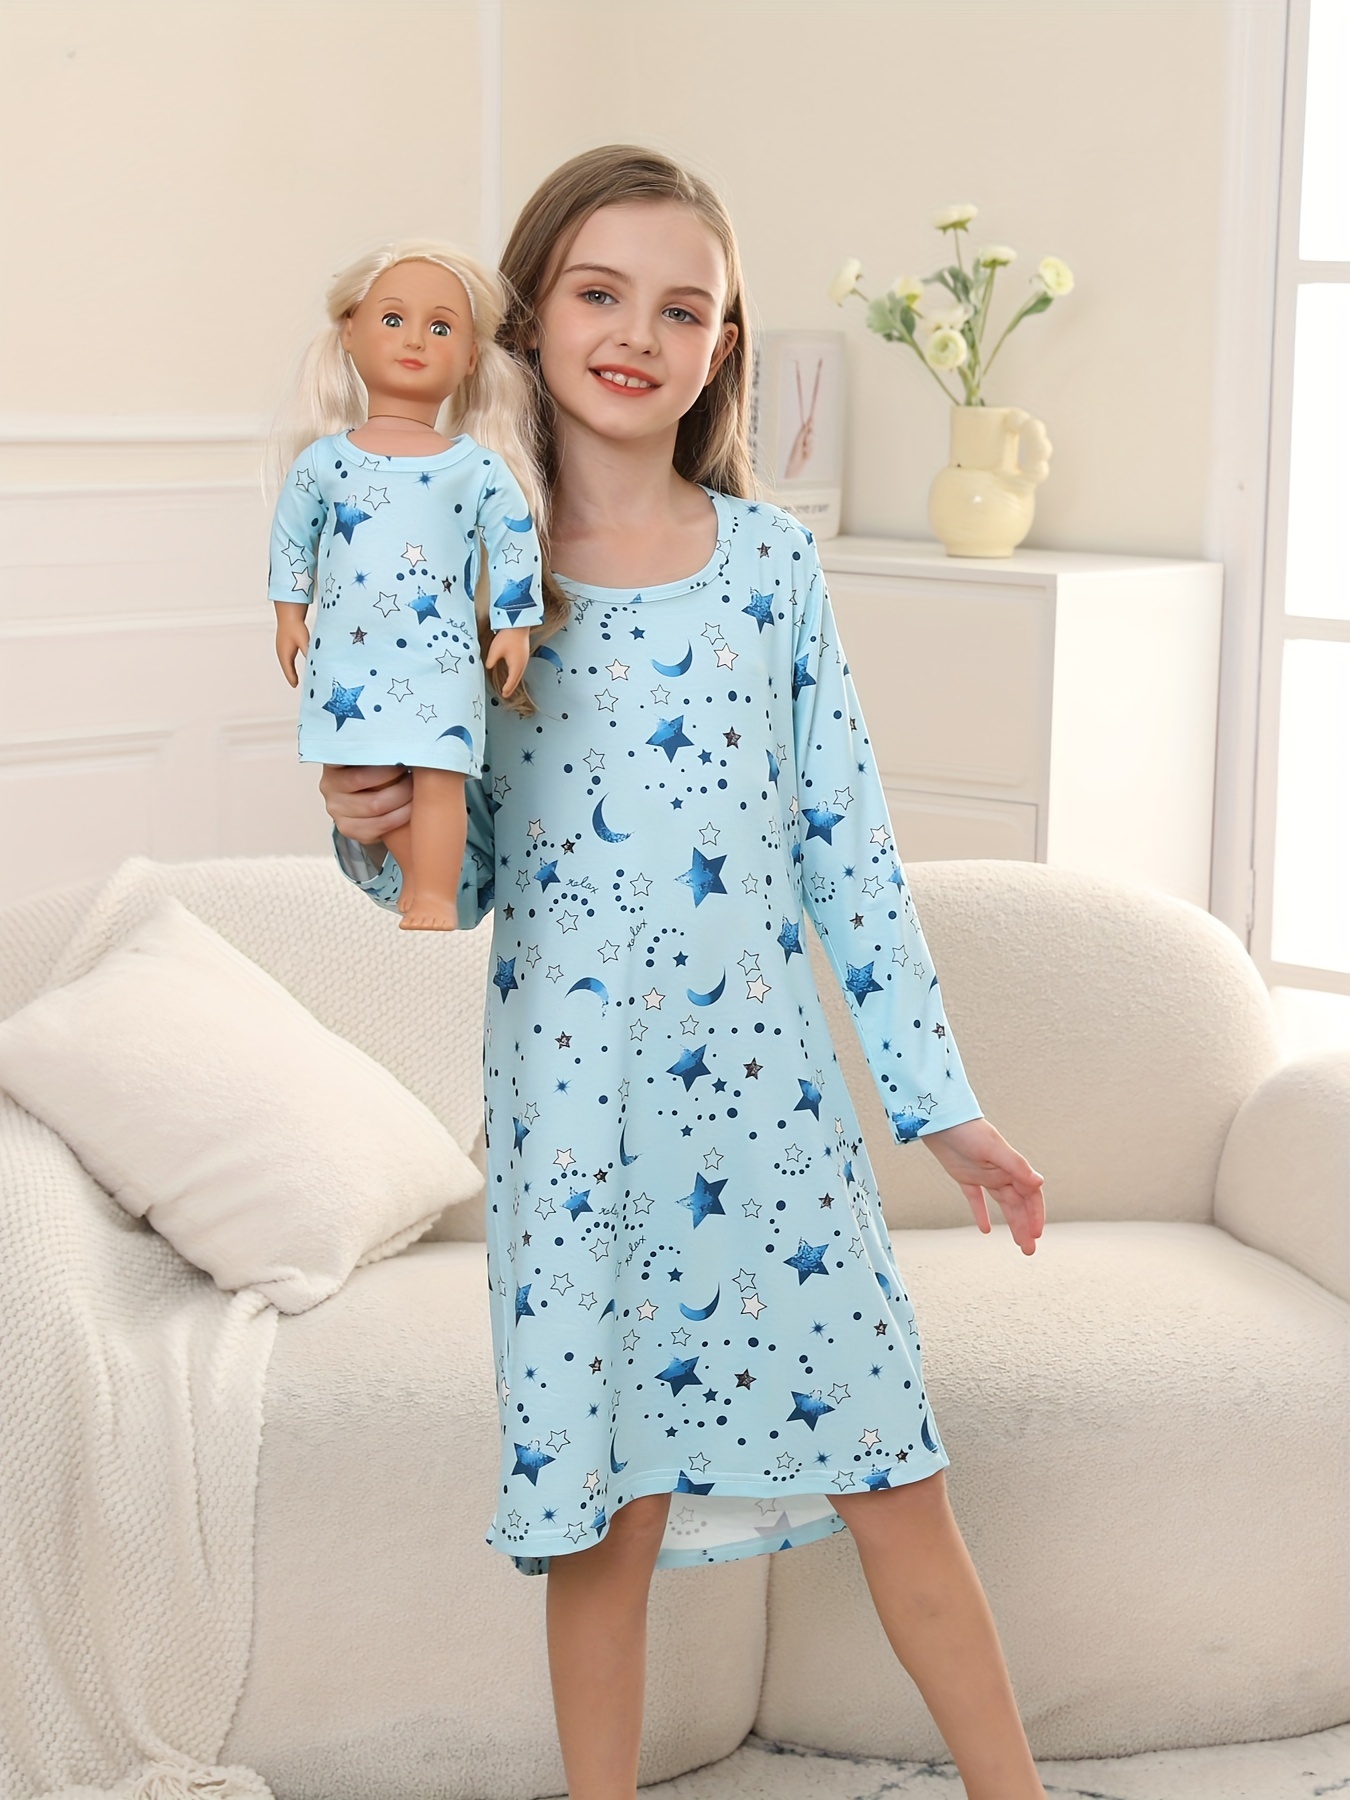 18 Inch American Doll Clothes